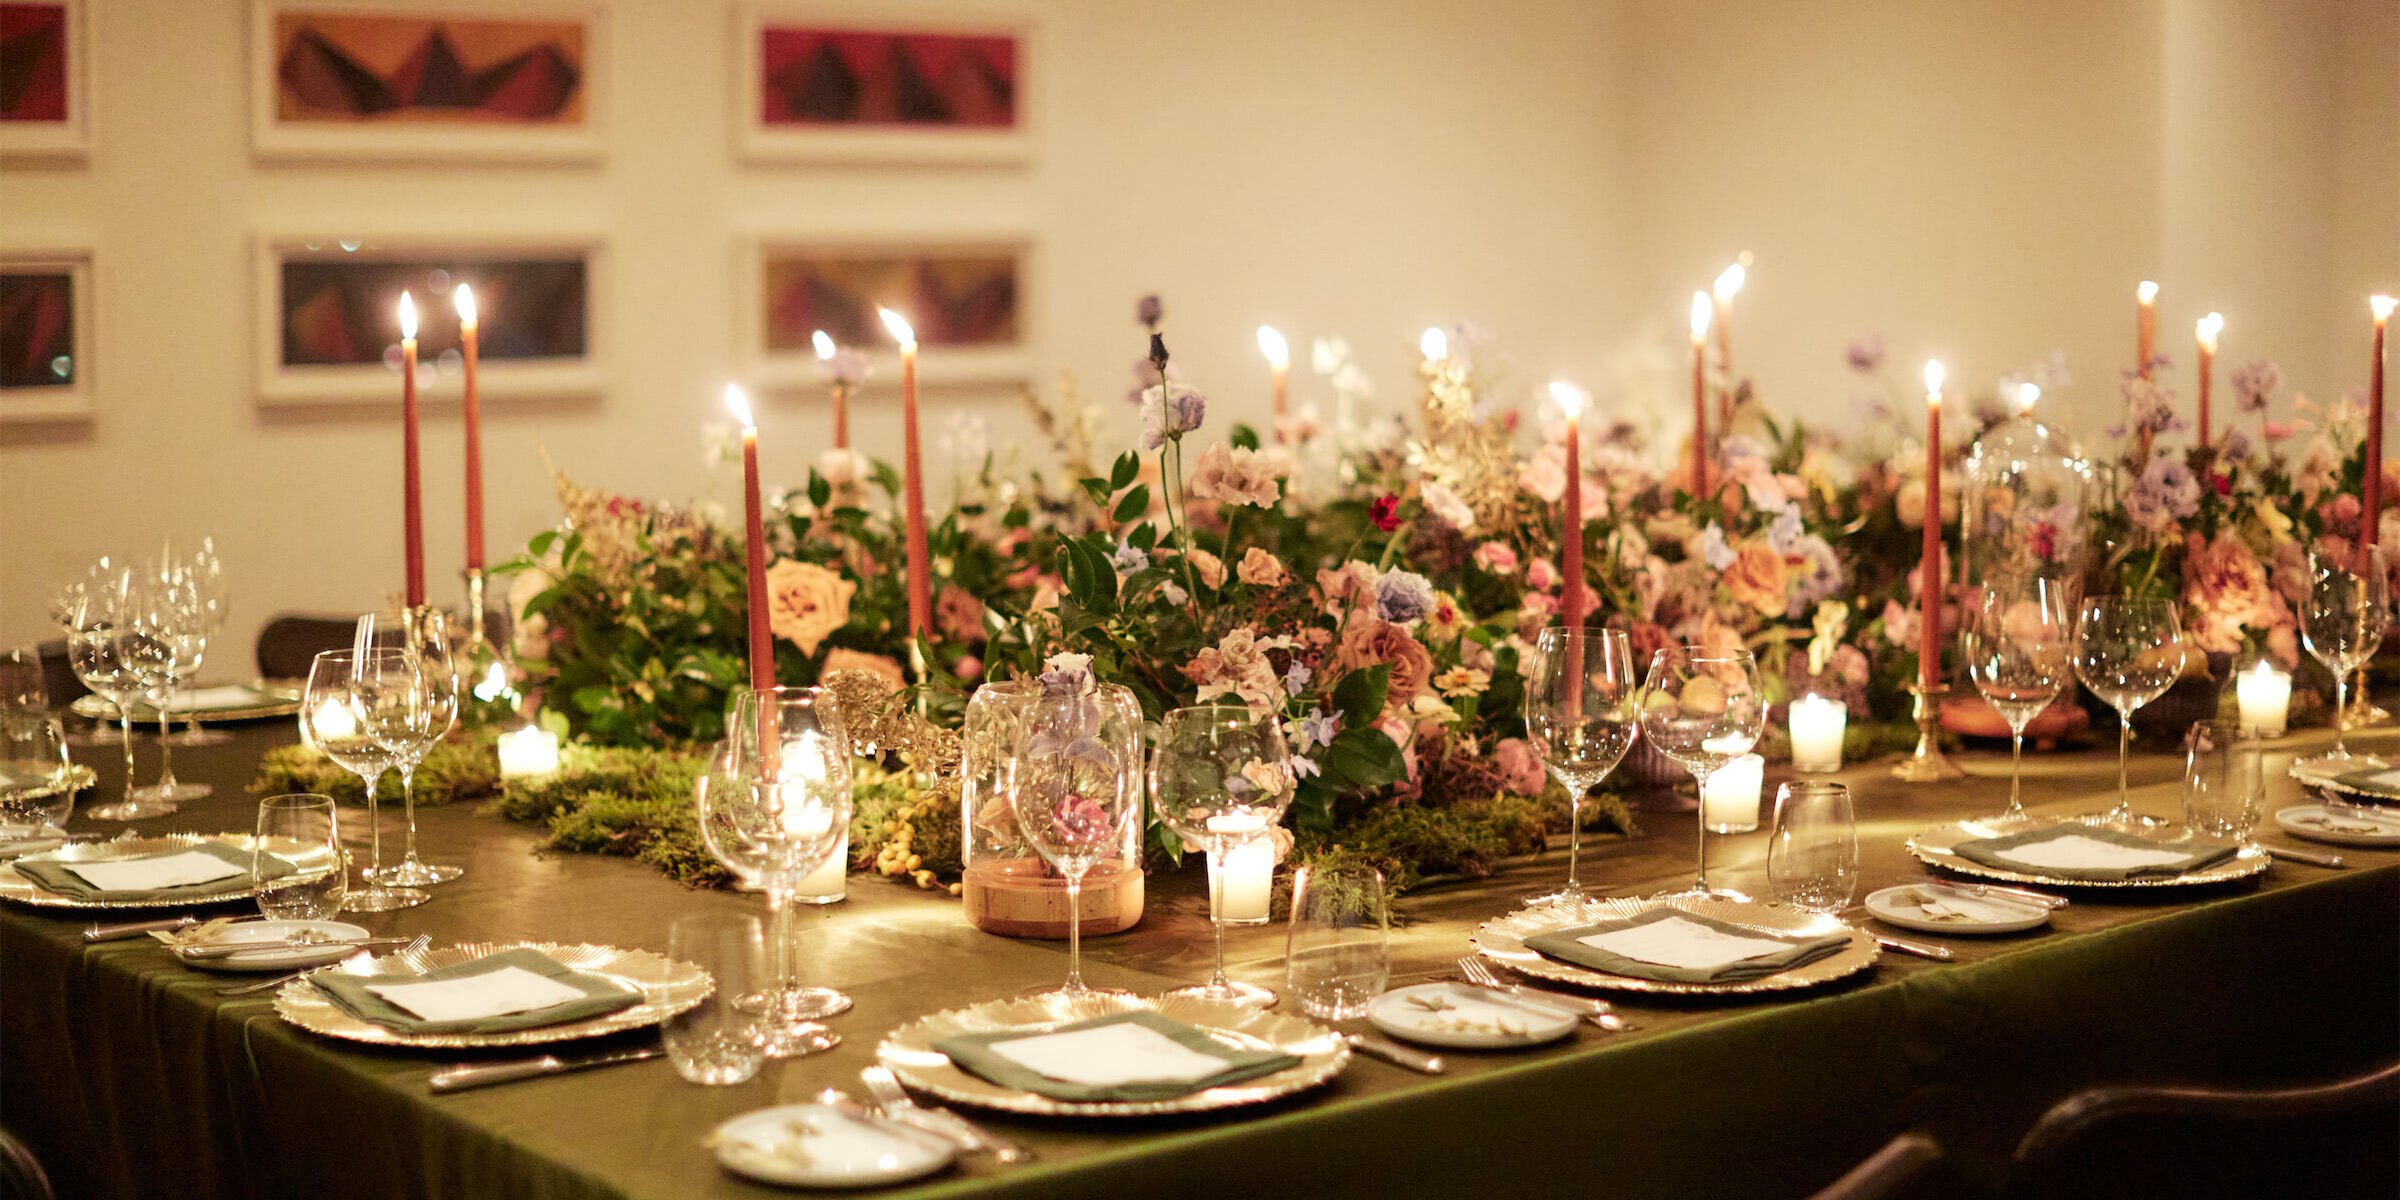 For this restaurant wedding, one long table held all the guests and was decorated with candles, moss, fresh flowers, and fresh fruit.